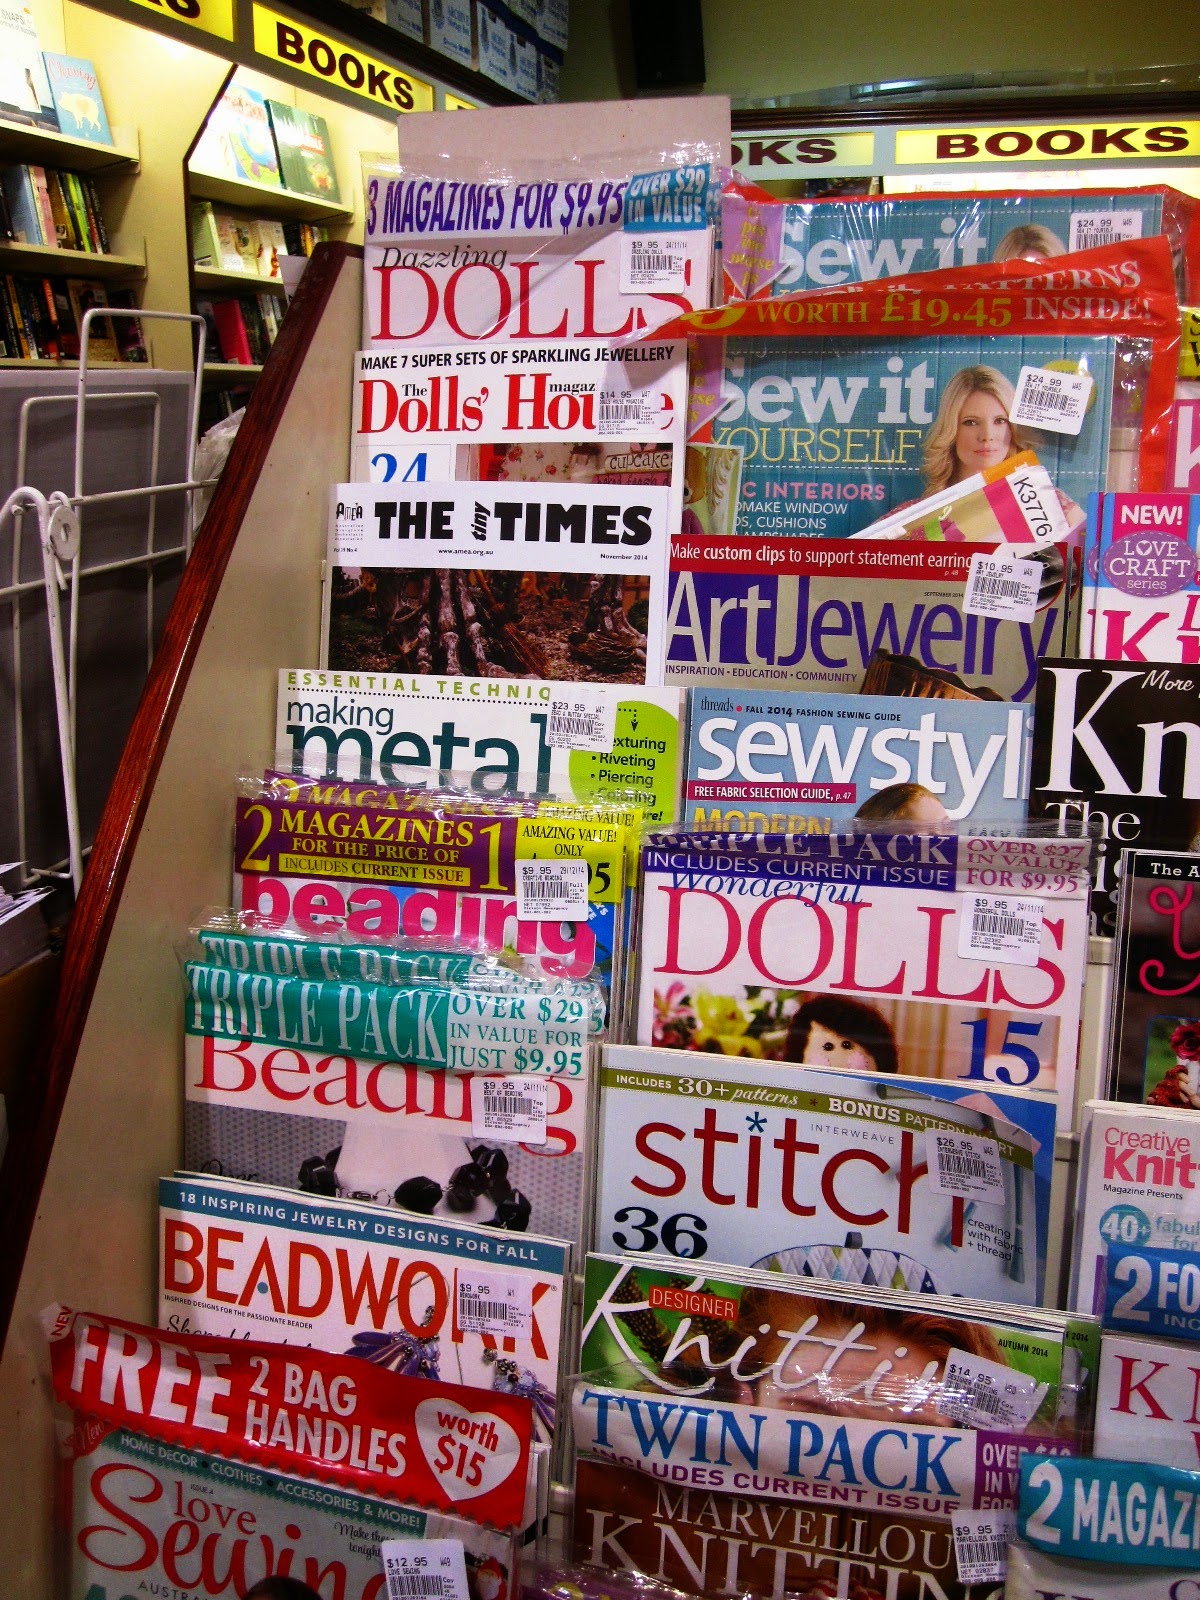 Display of craft magazines at a newsagents.